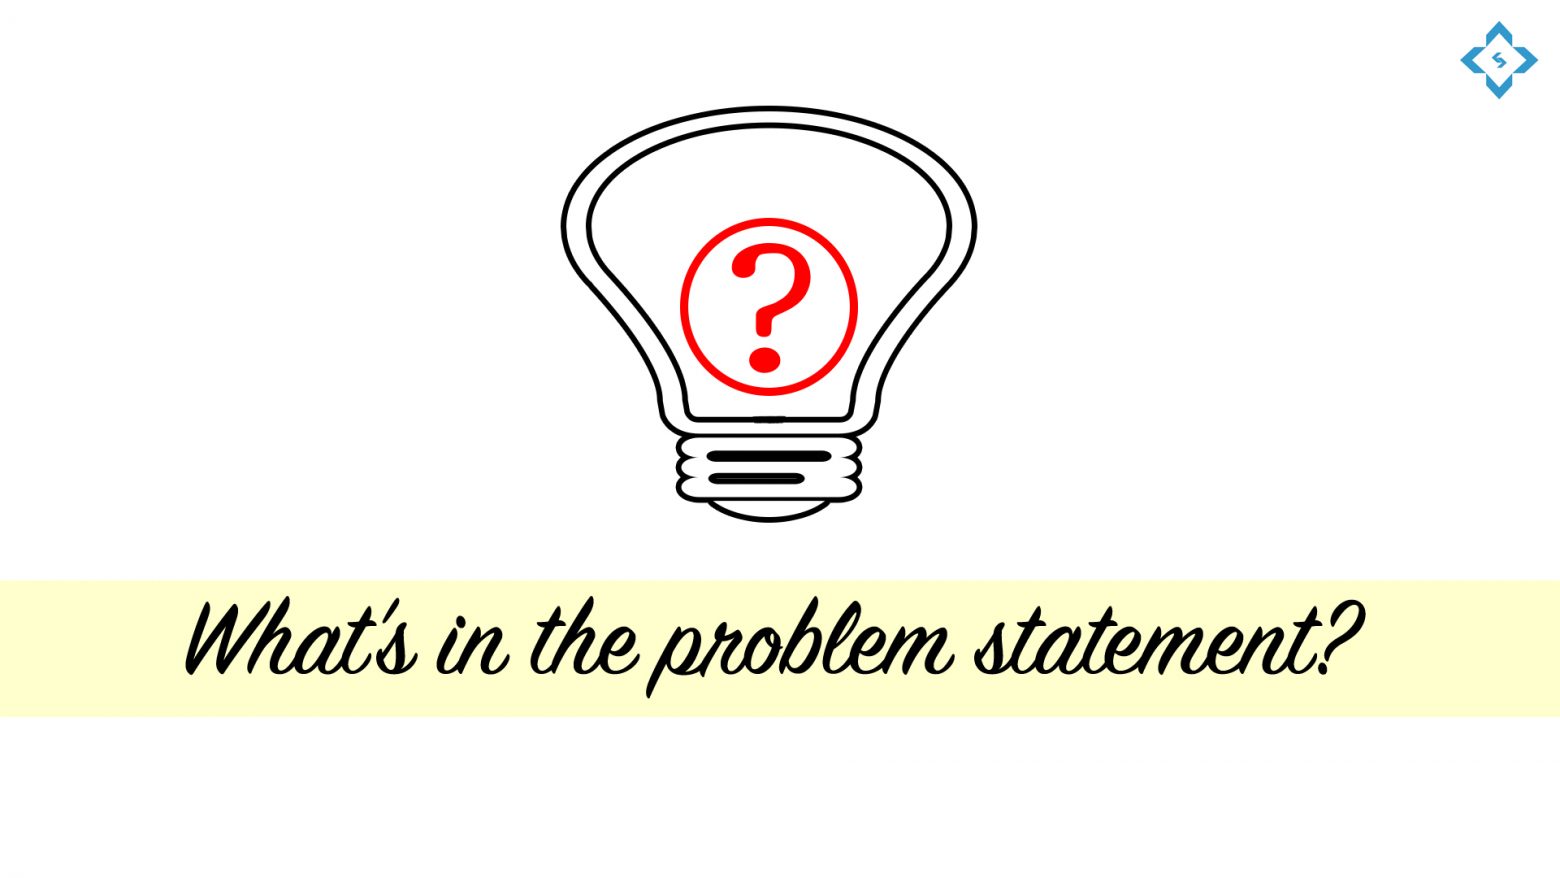 What's in the problem statement?